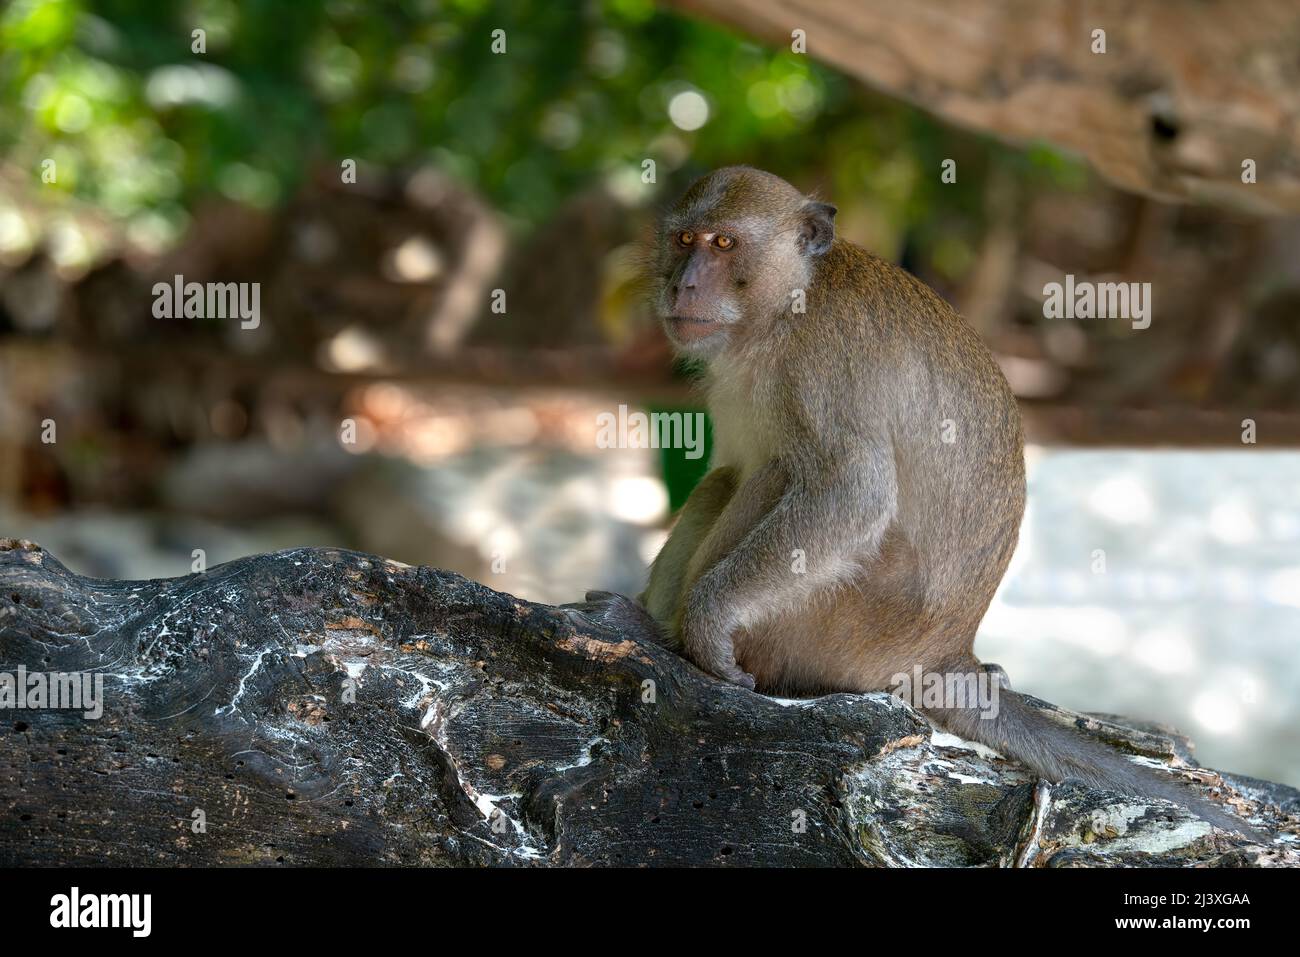 Wild Macaque monkey sitting on a tree at tropical island in Thailand. Stock Photo